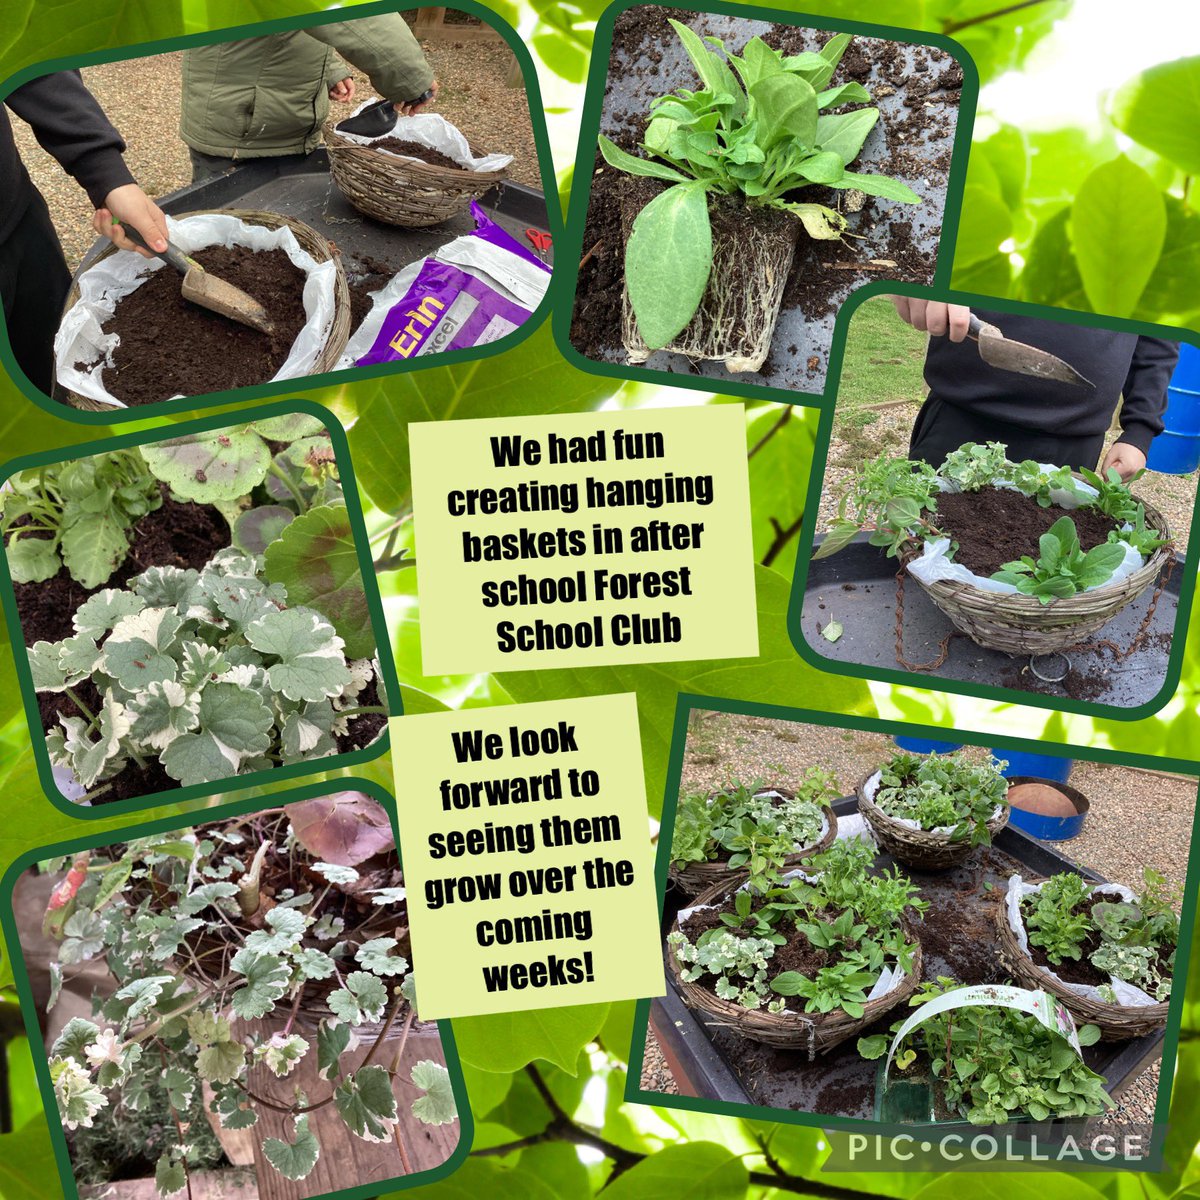 We had so much fun in our after school Forest School Club. One group filled hanging baskets ready for display outside the reception area. We learnt about hanging plants, variegation and drainage. Well done everyone!⭐️👩🏻‍💼#enrichment #thejcway #outdoorlearning #science